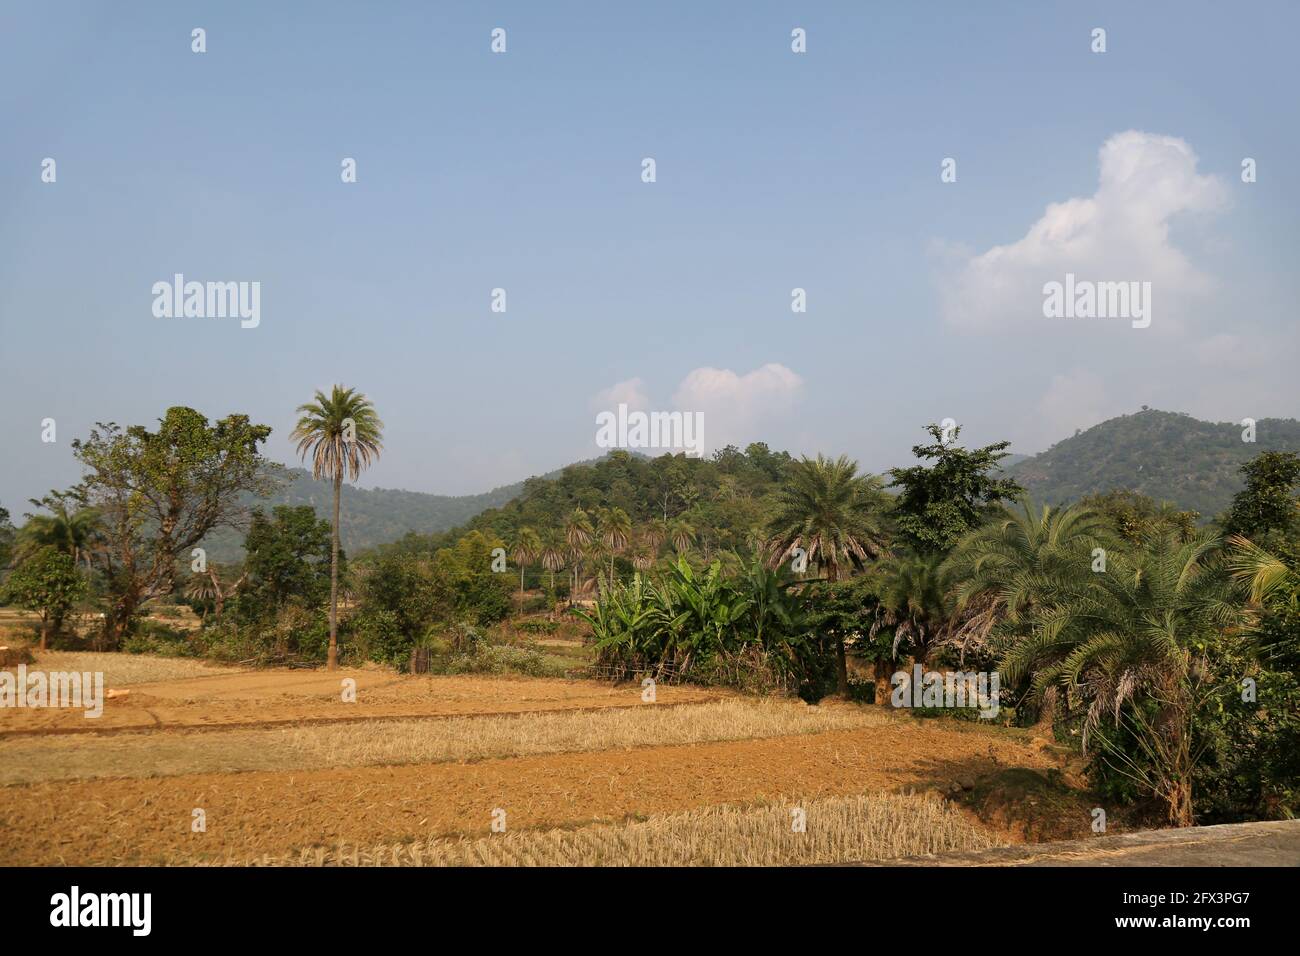 LANJIA SAORA TRIBE - Typical view of Paddy fields of Lanjia Saora tribe. They pursue shifting cultivation. Gunpur tribal village of Odisha, India Stock Photo